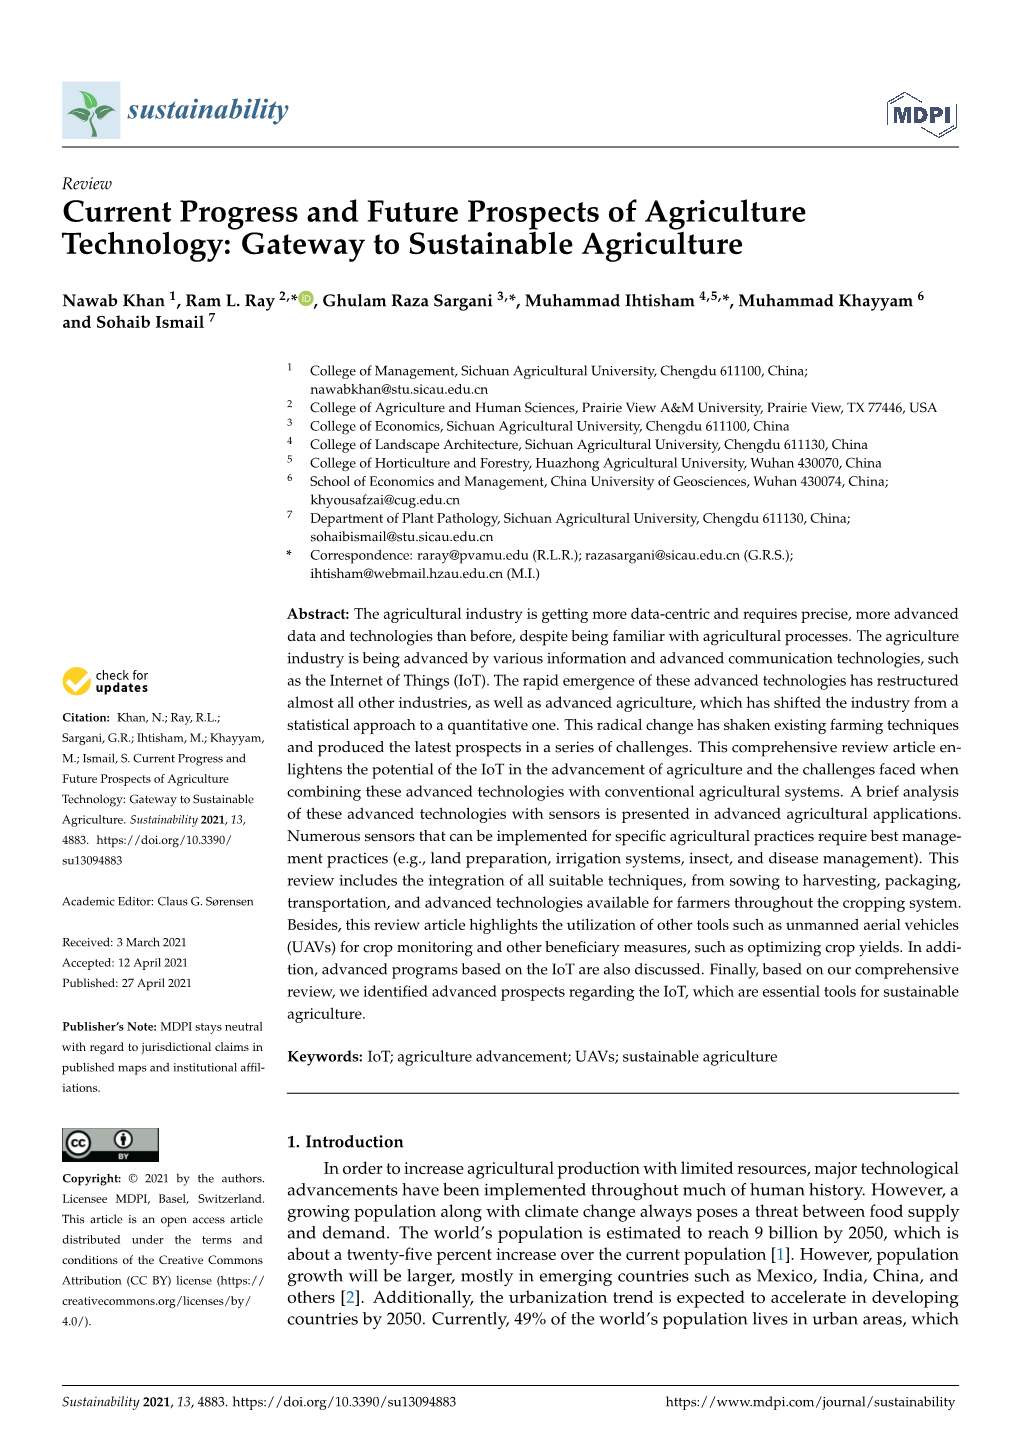 Current Progress and Future Prospects of Agriculture Technology: Gateway to Sustainable Agriculture